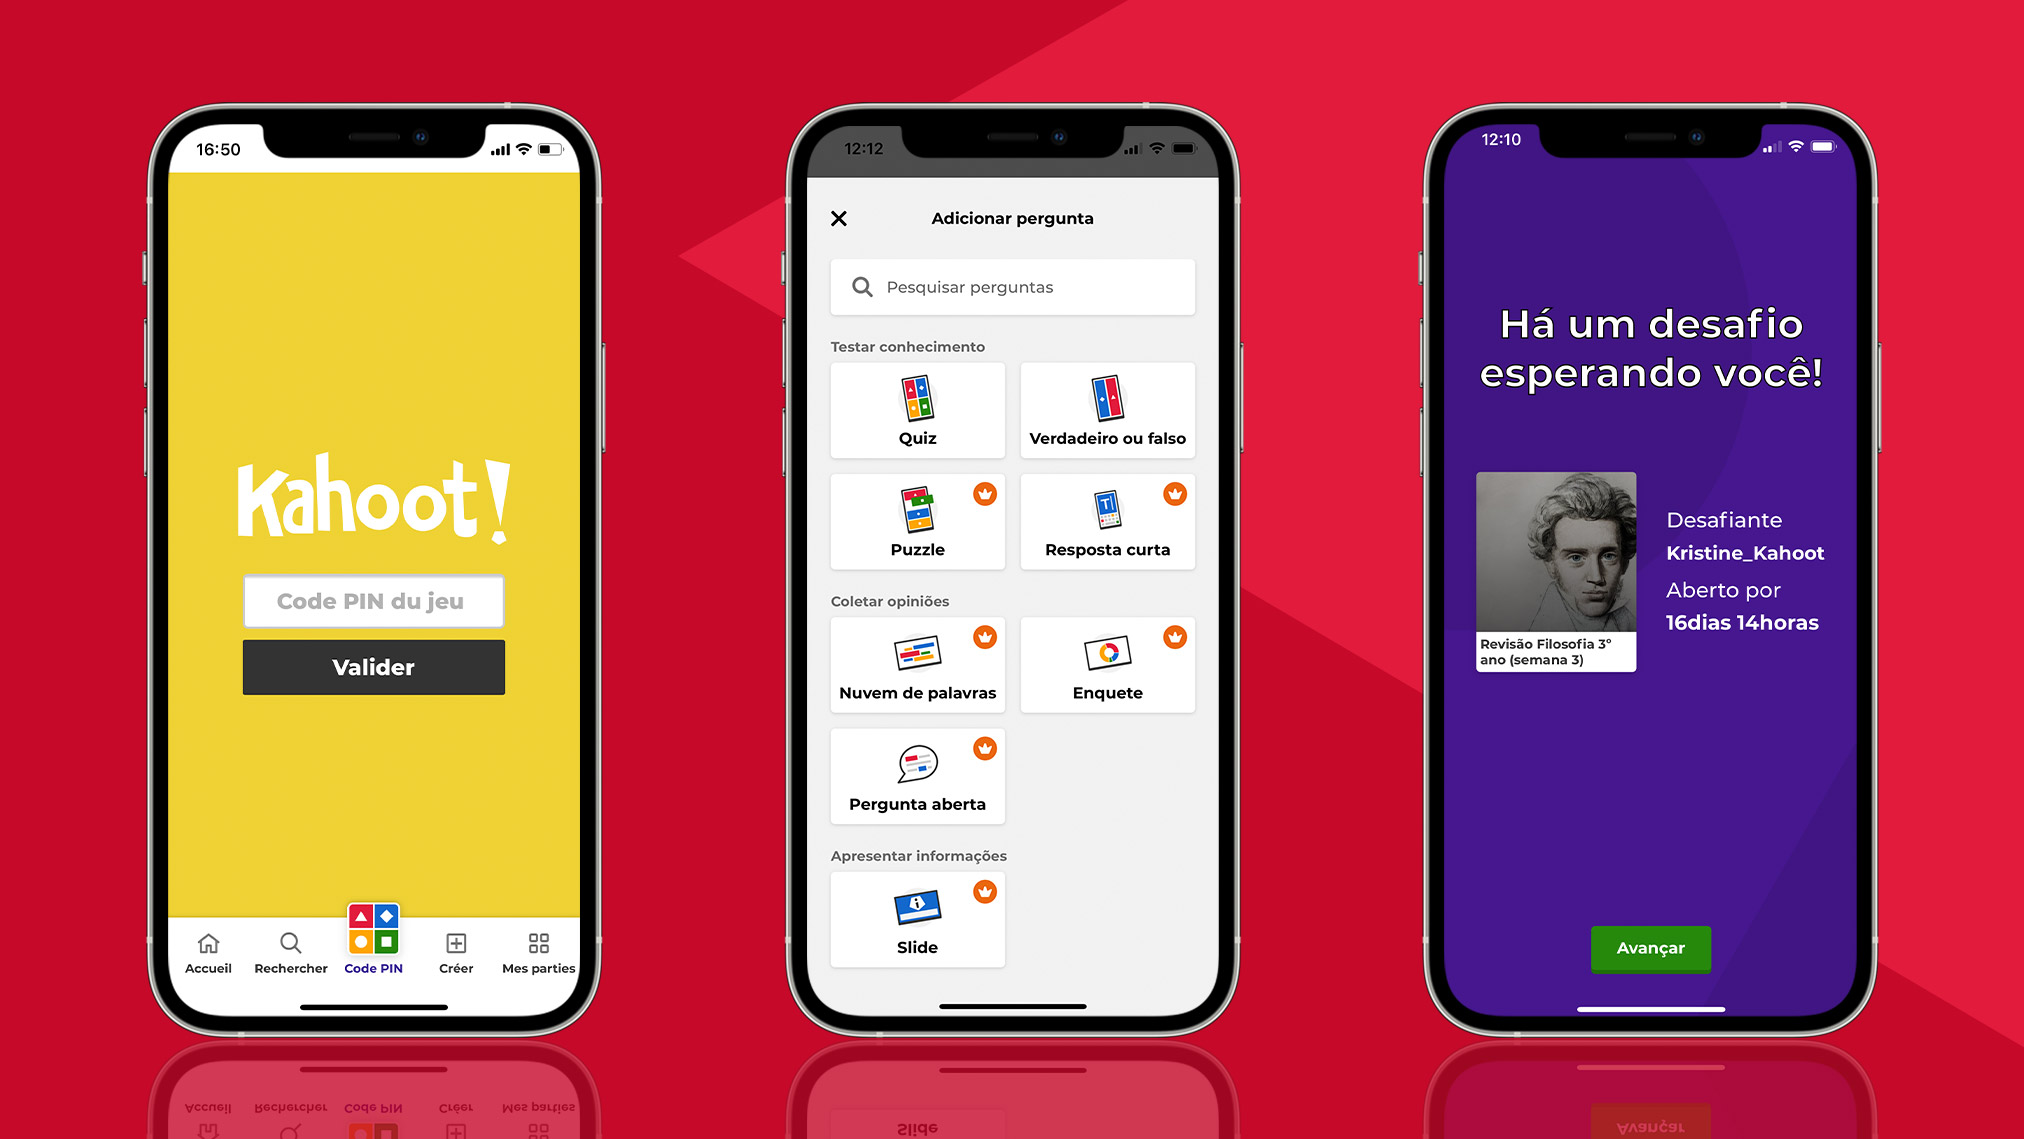 Kahoot S Mobile App Now Available In 5 Global Languages